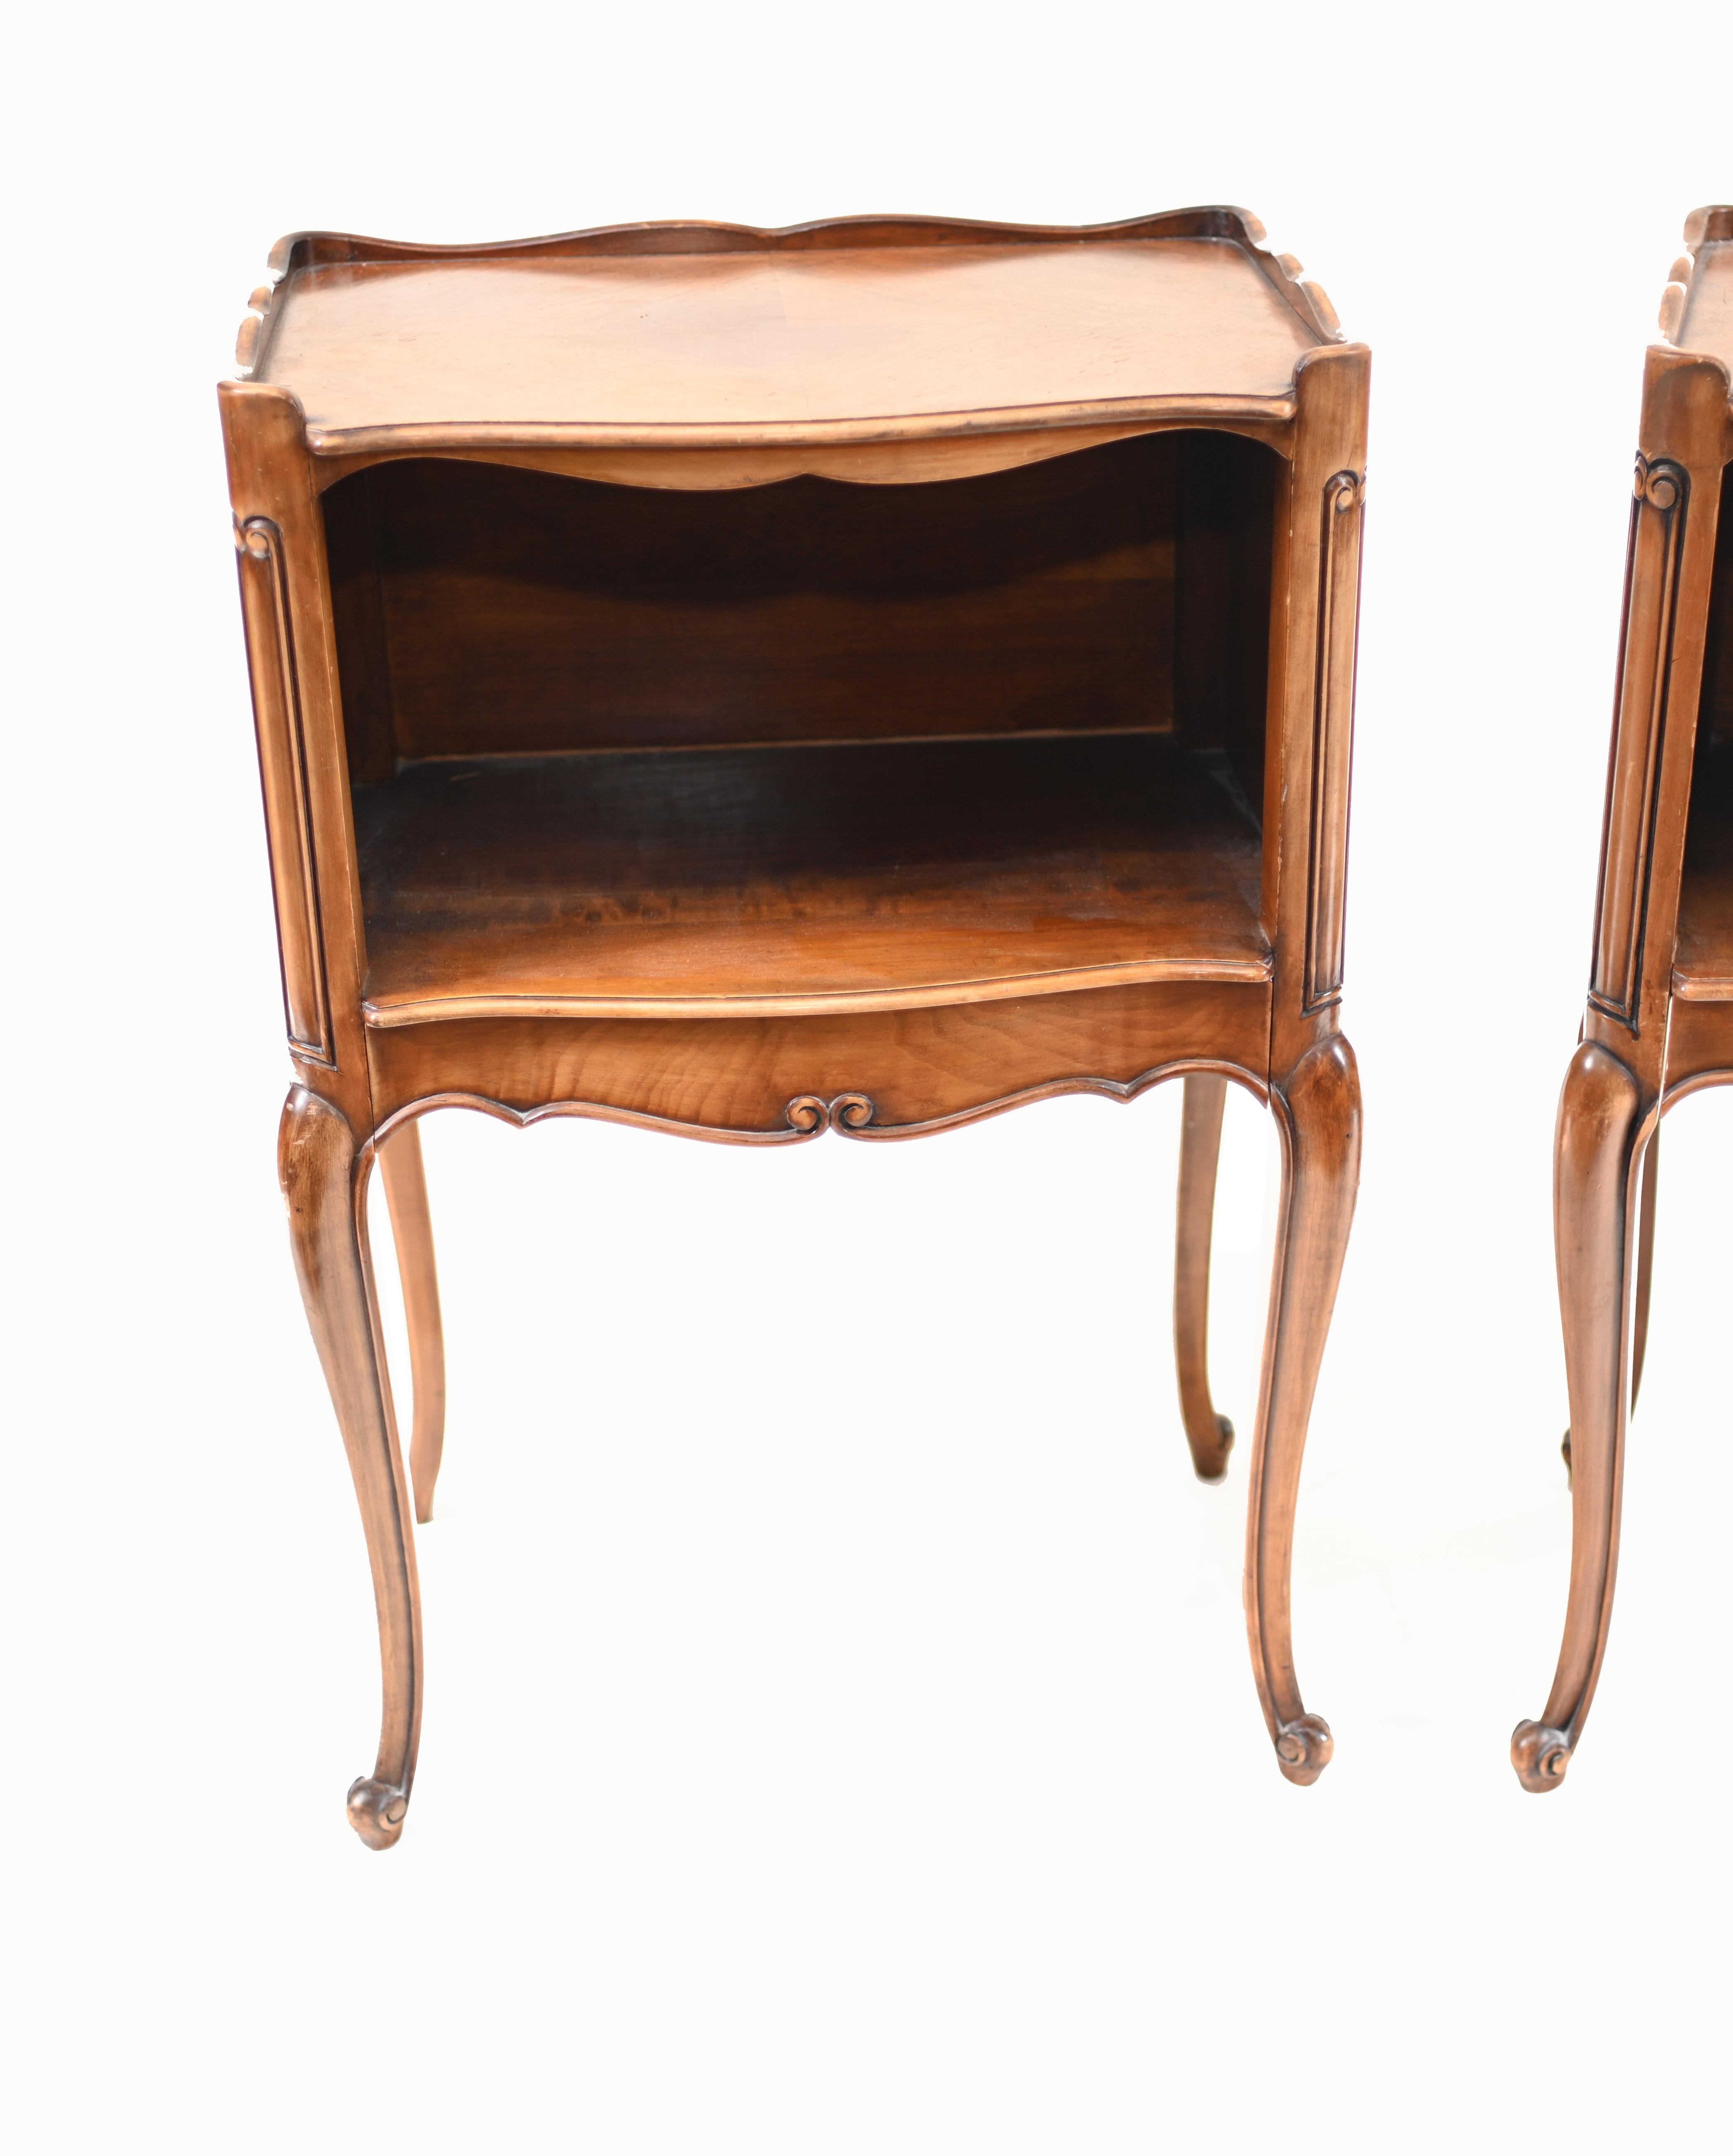 Elegant pair of French bedside cabinets in kingwood
Elegantly curved legs make these a great interiors pair
Circa 1920 and purchased from a dealer on Marche Biron at Paris antiques markets
Offered in great shape ready for home use right away
We